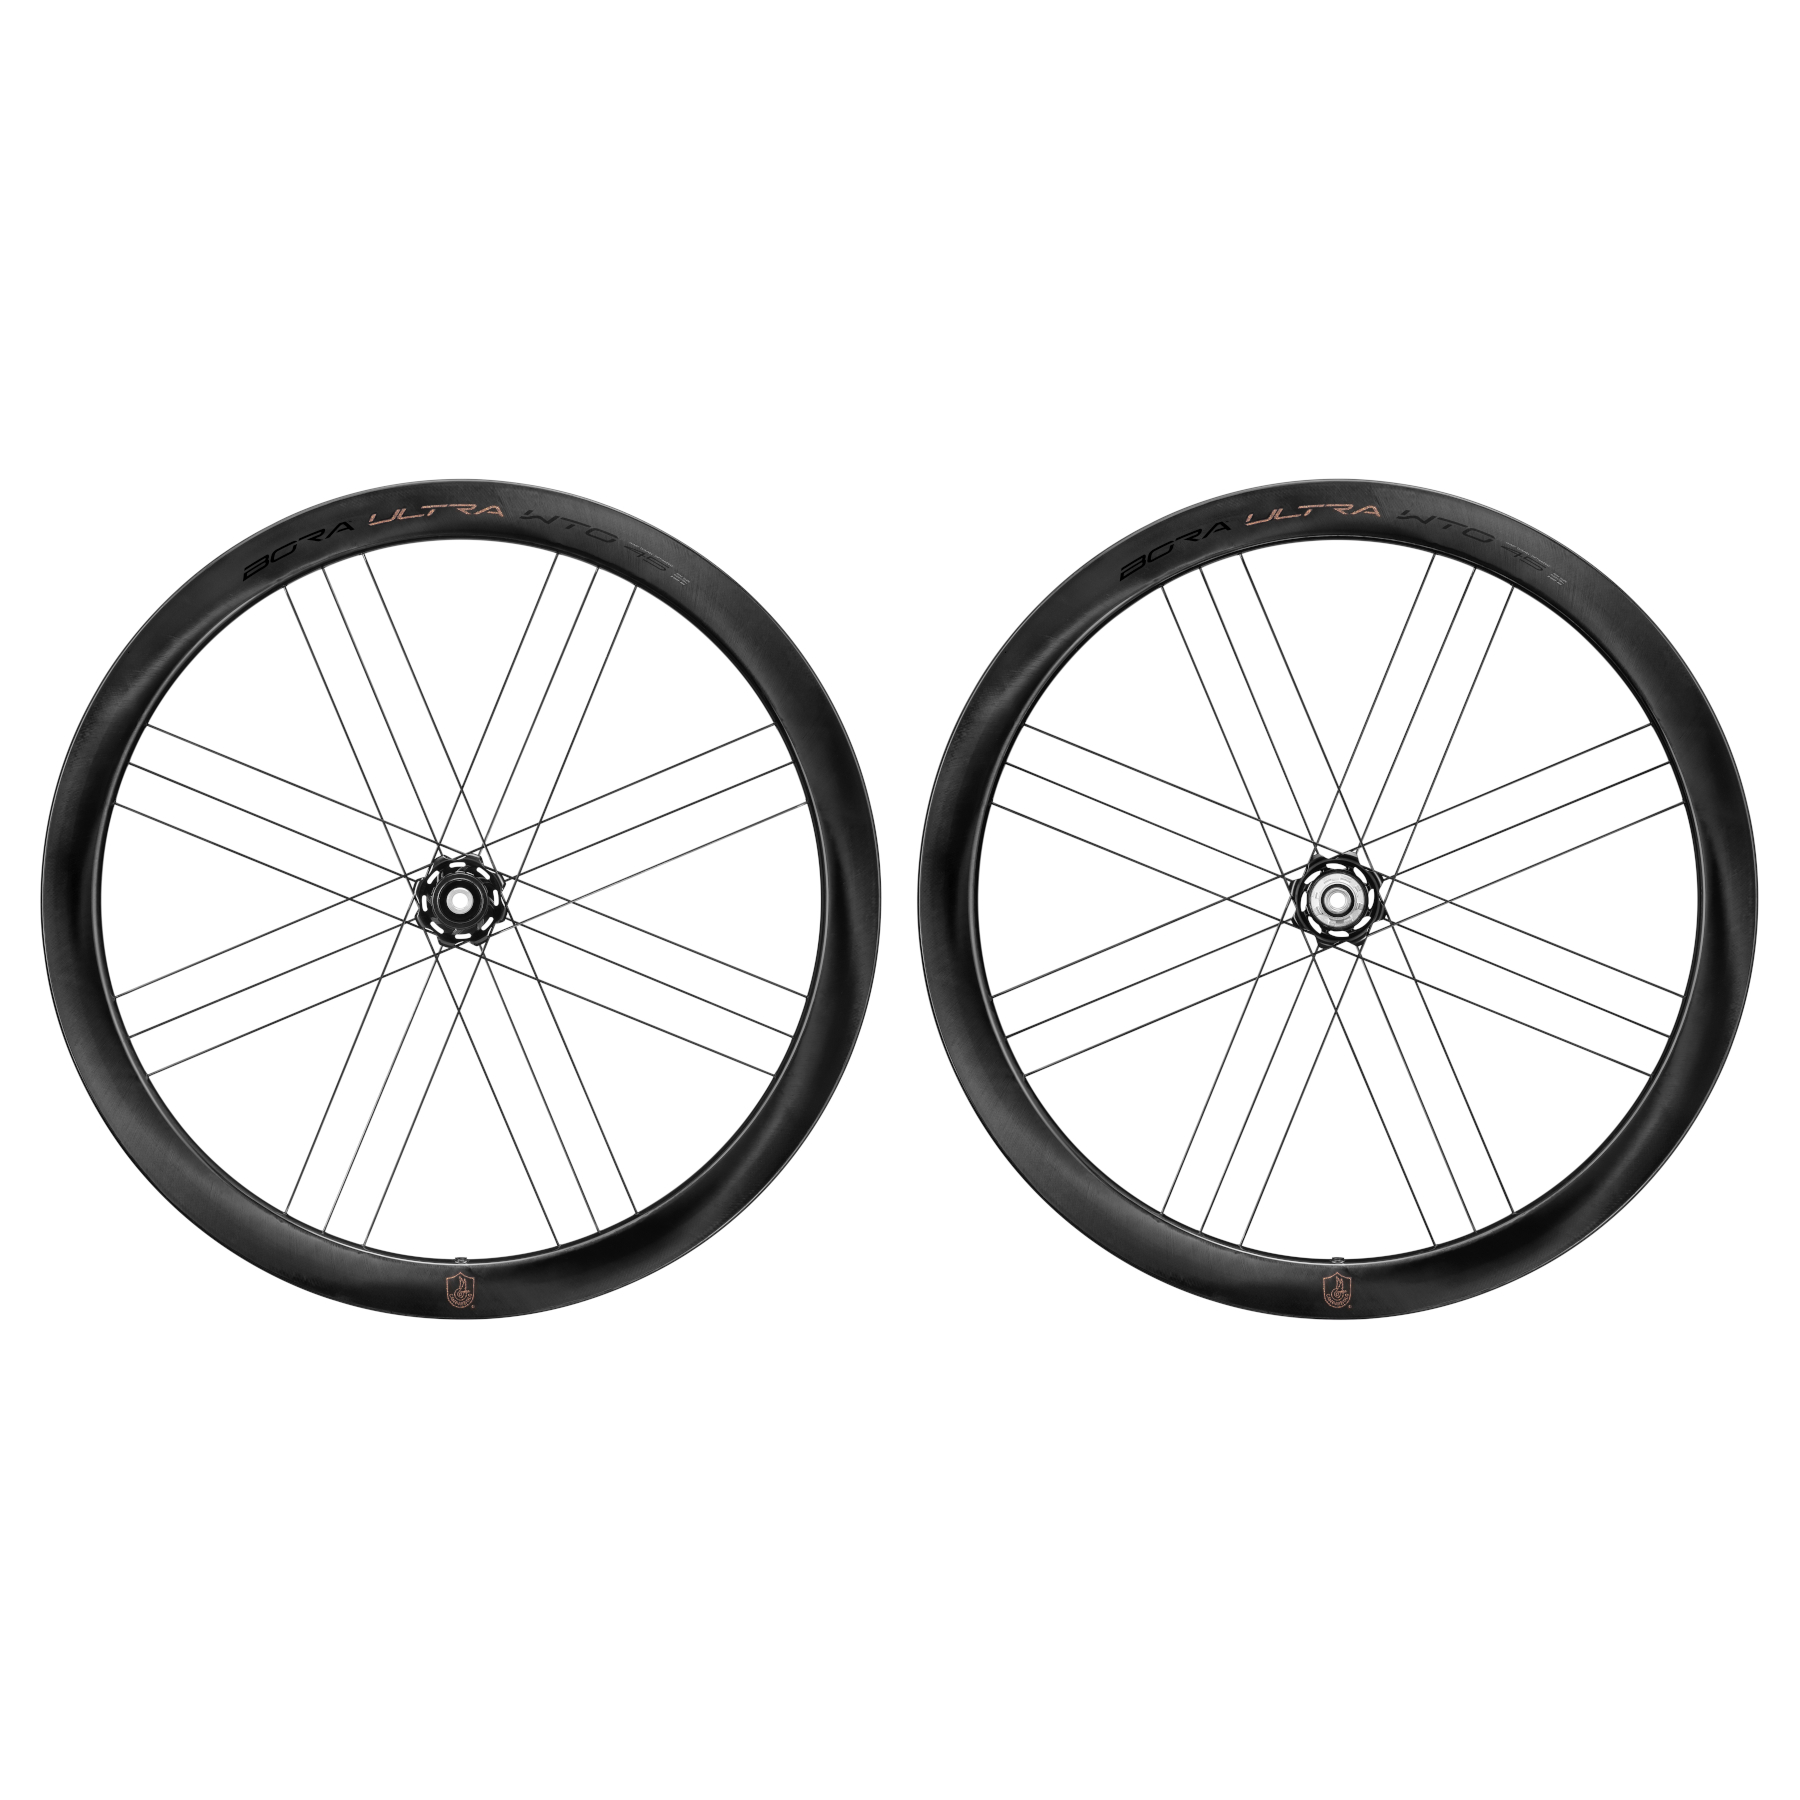 Picture of Campagnolo Bora Ultra WTO 45 DB - 28 Inch Carbon Wheelset - 2-Way Fit - AFS - Shimano HG